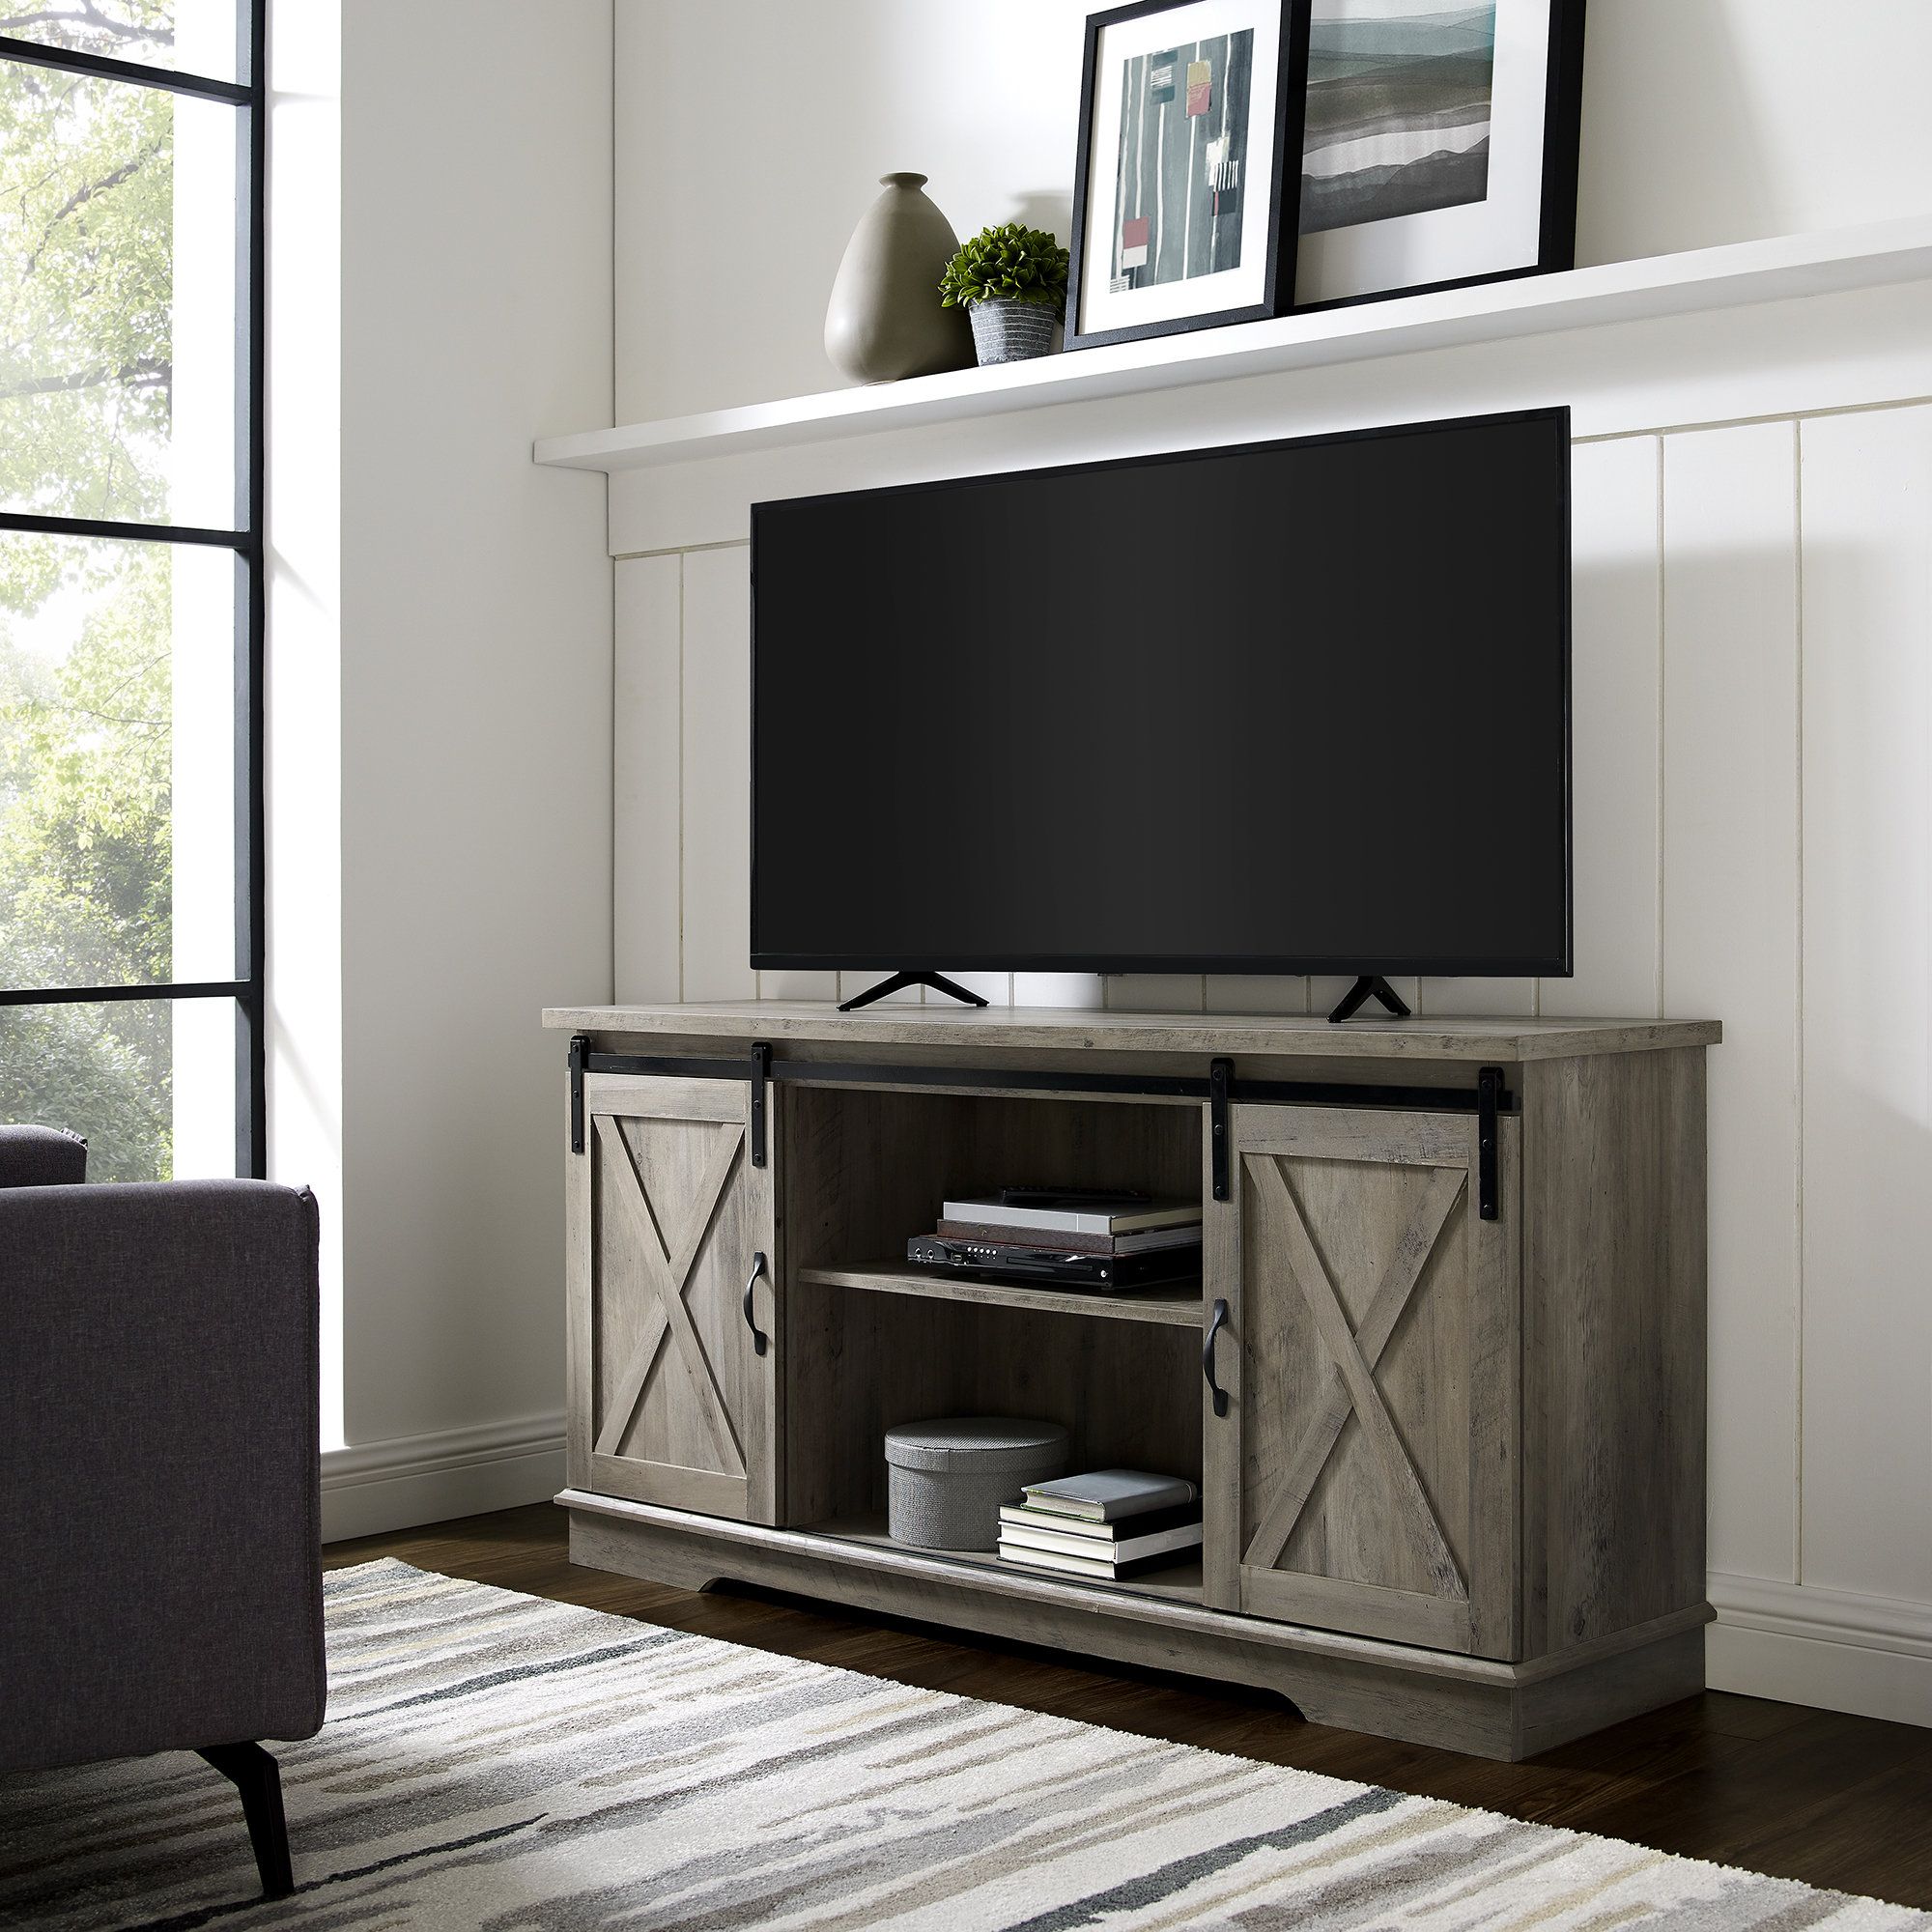 Kenzie 60 Inch Open Display Tv Stands With Fashionable 72 Inch Tv Stand (View 8 of 20)